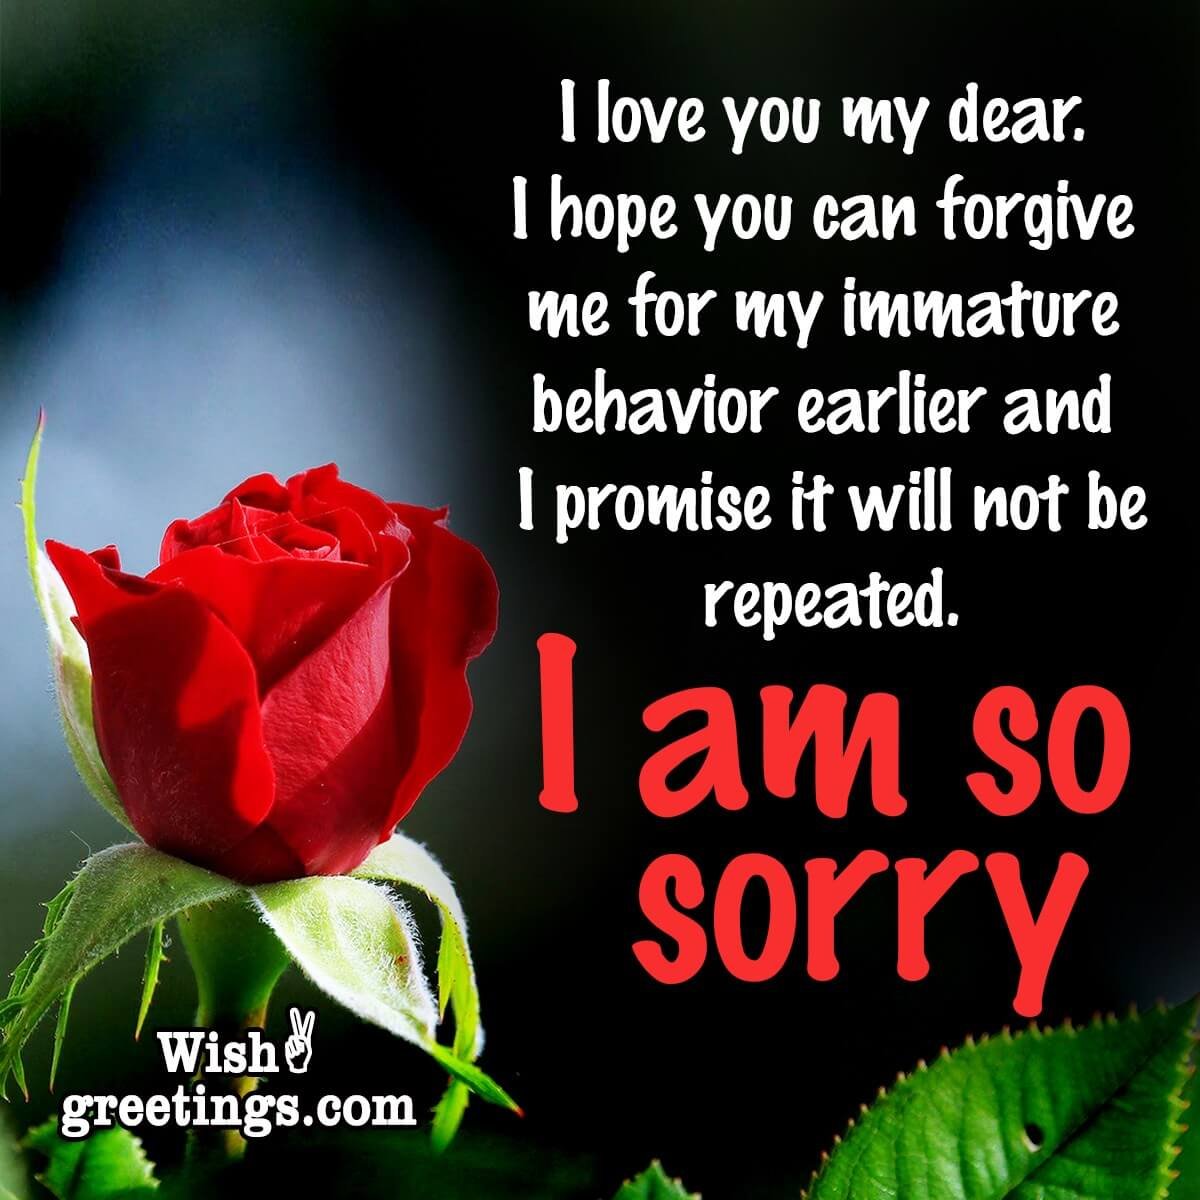 Sorry Messages - Wish Greetings